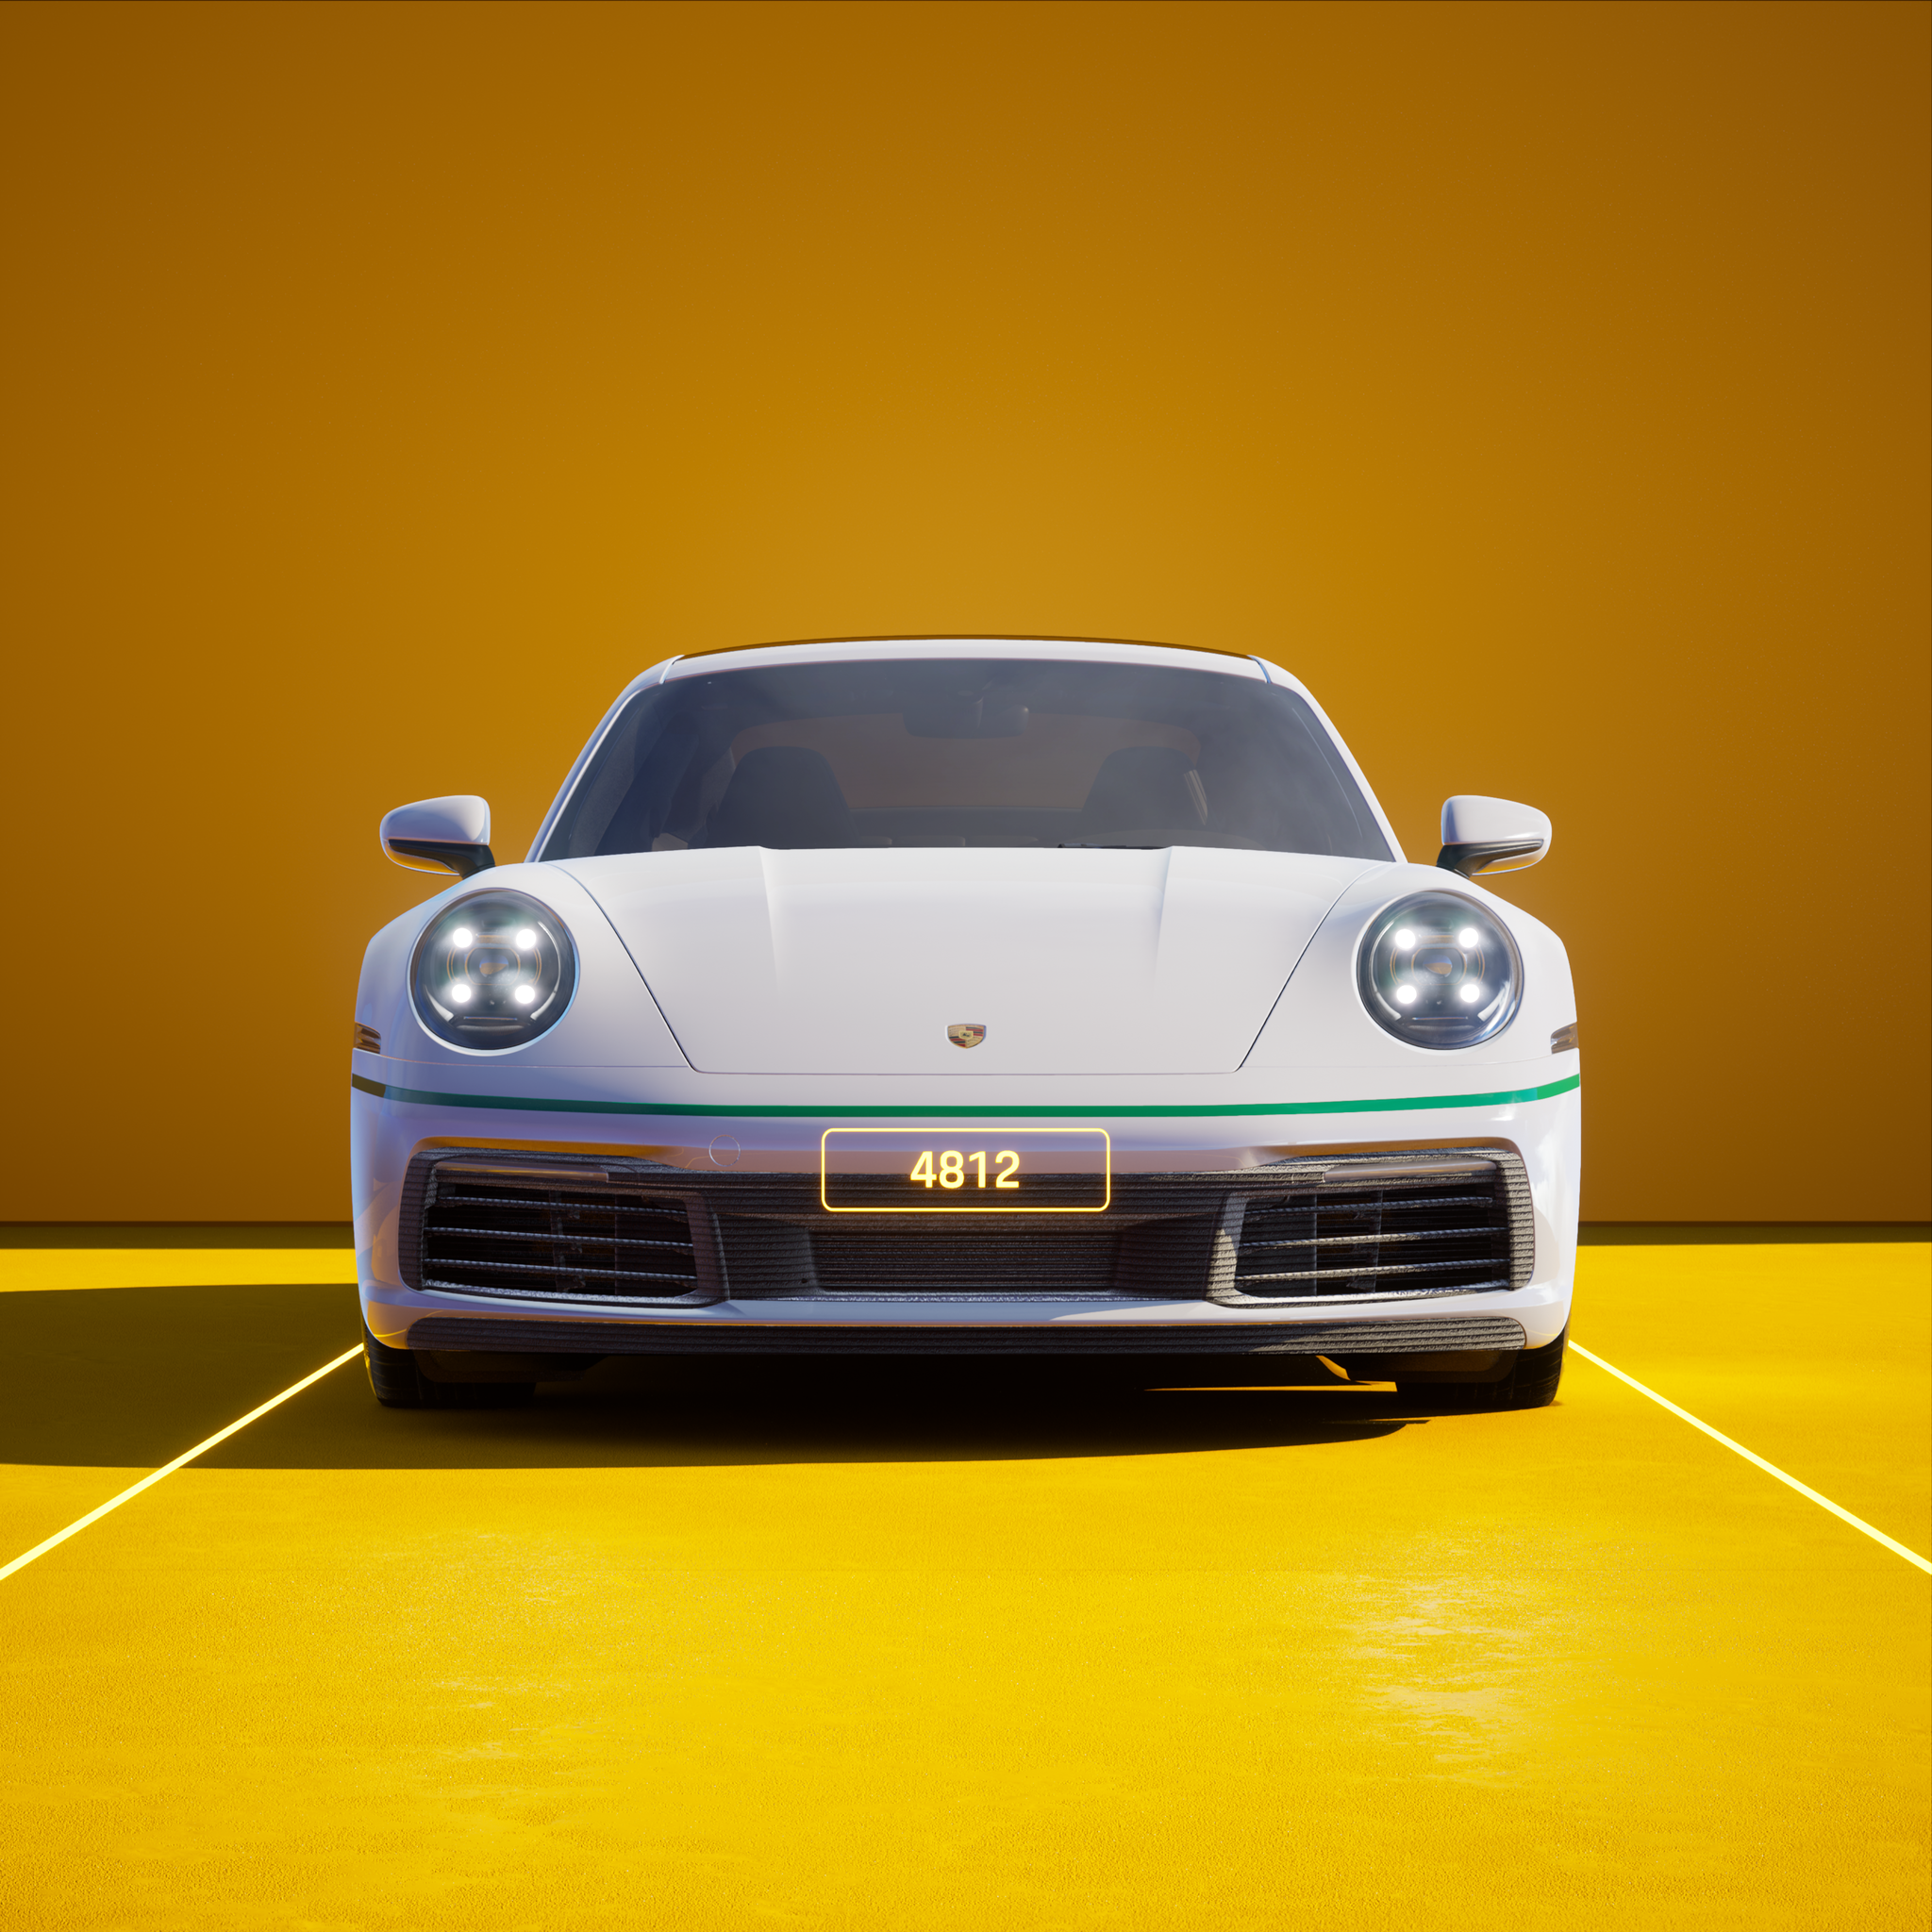 The PORSCHΞ 911 4812 image in phase